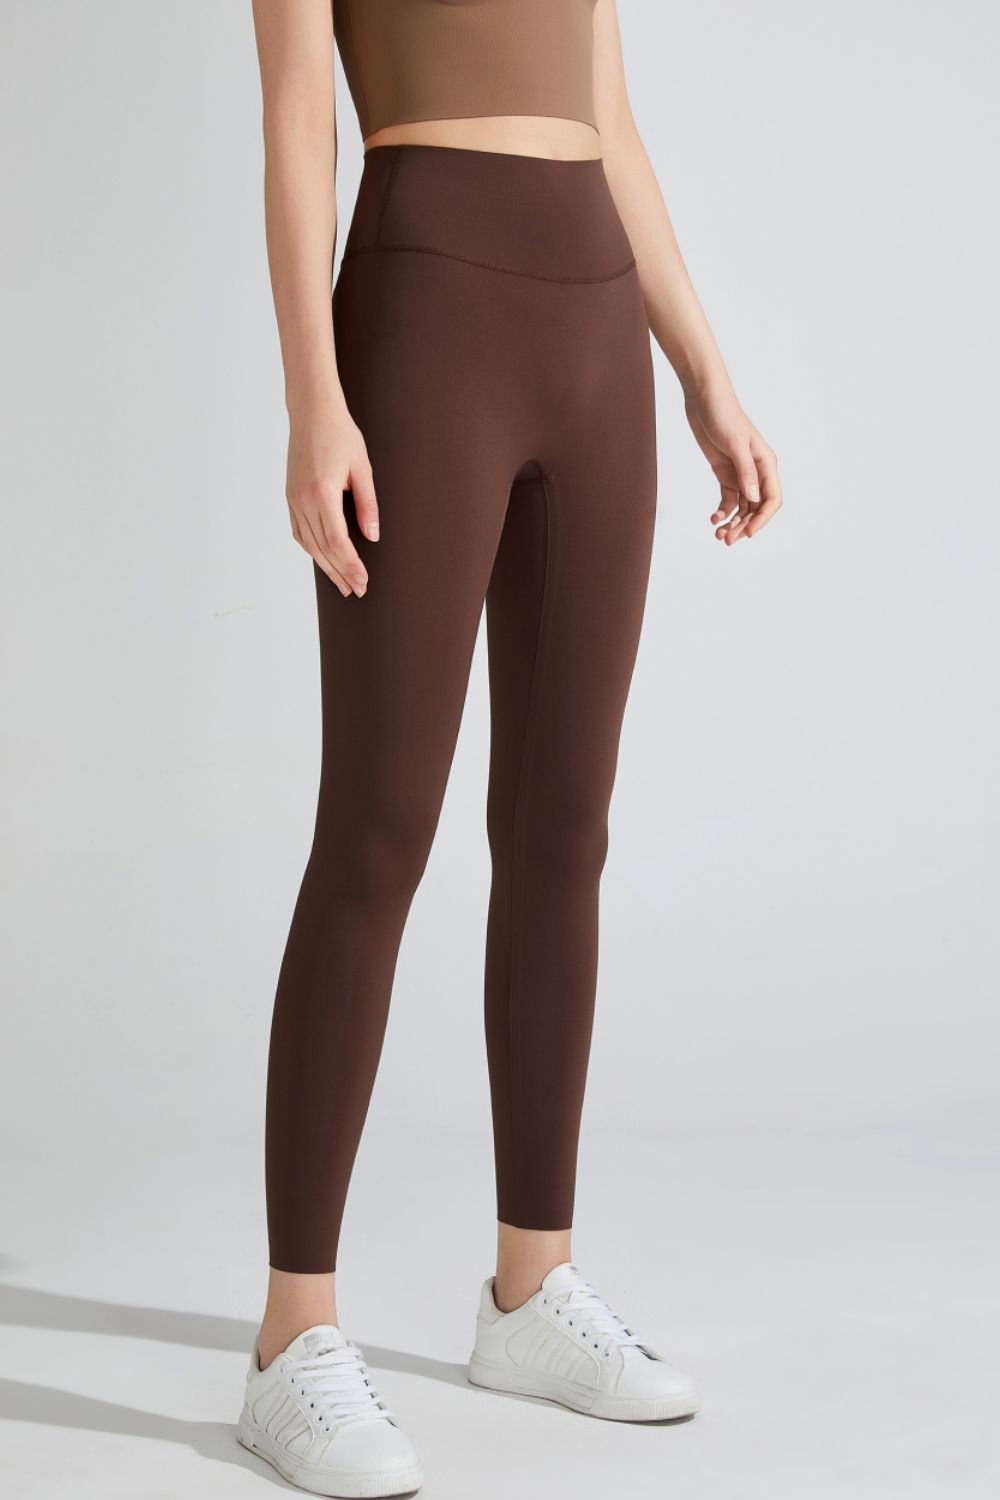 High Waist Breathable Sports Leggings - Brown / S - Women’s Clothing & Accessories - Pants - 7 - 2024